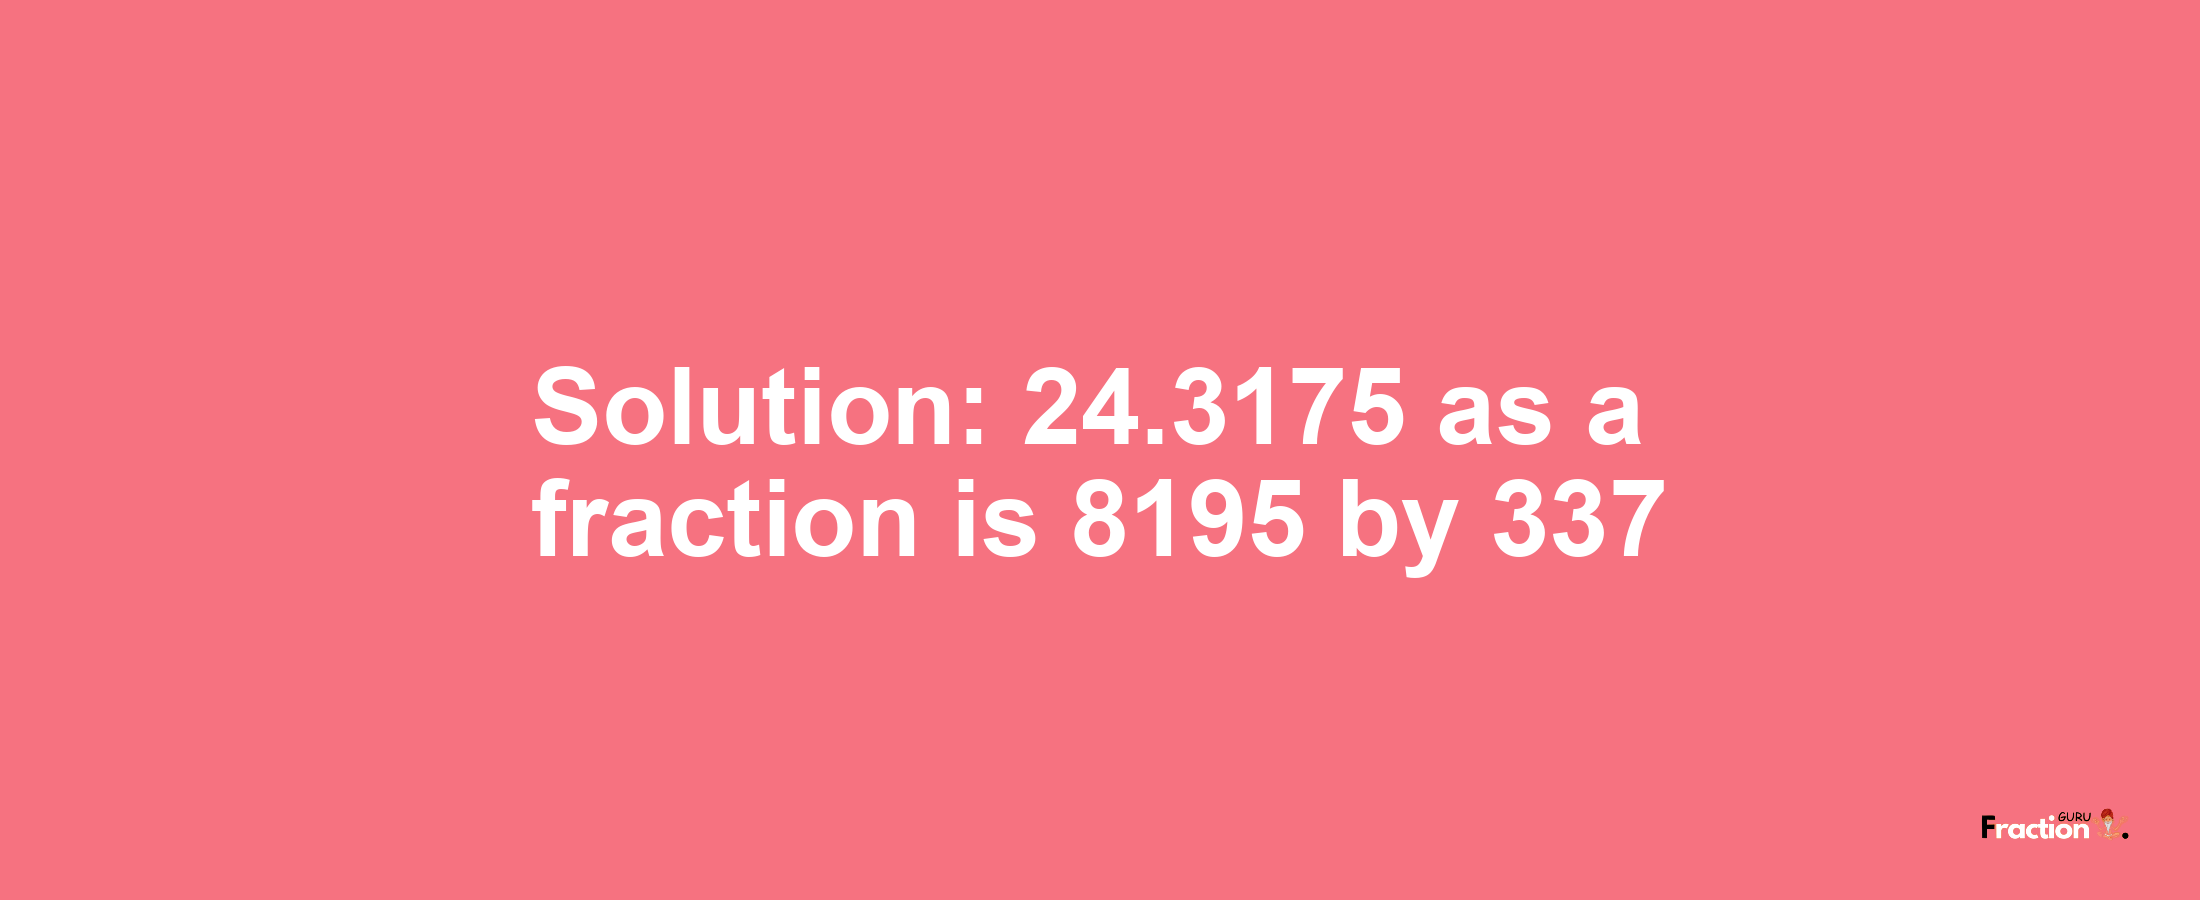 Solution:24.3175 as a fraction is 8195/337